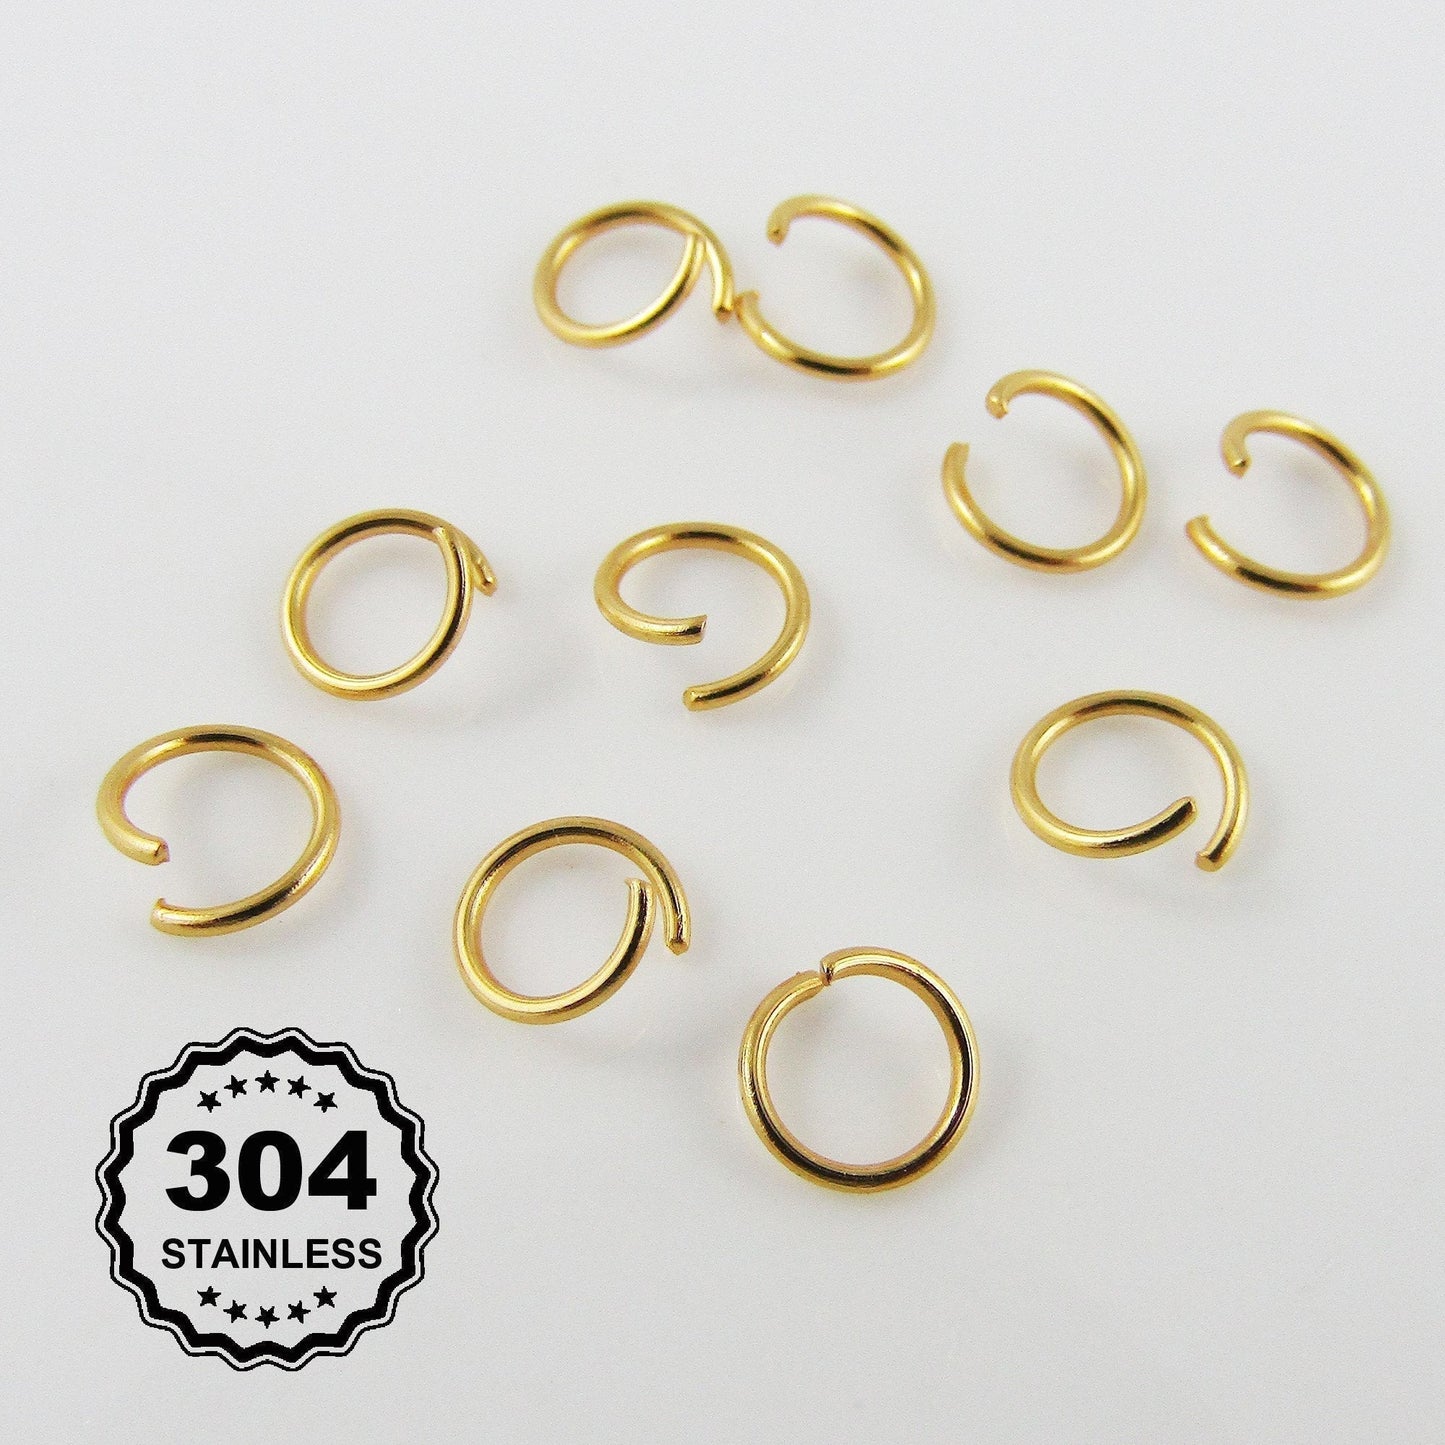 20 pcs Bulk Gold Plated Stainless Steel 6x0.7mm Open Jump Rings Findings Craft